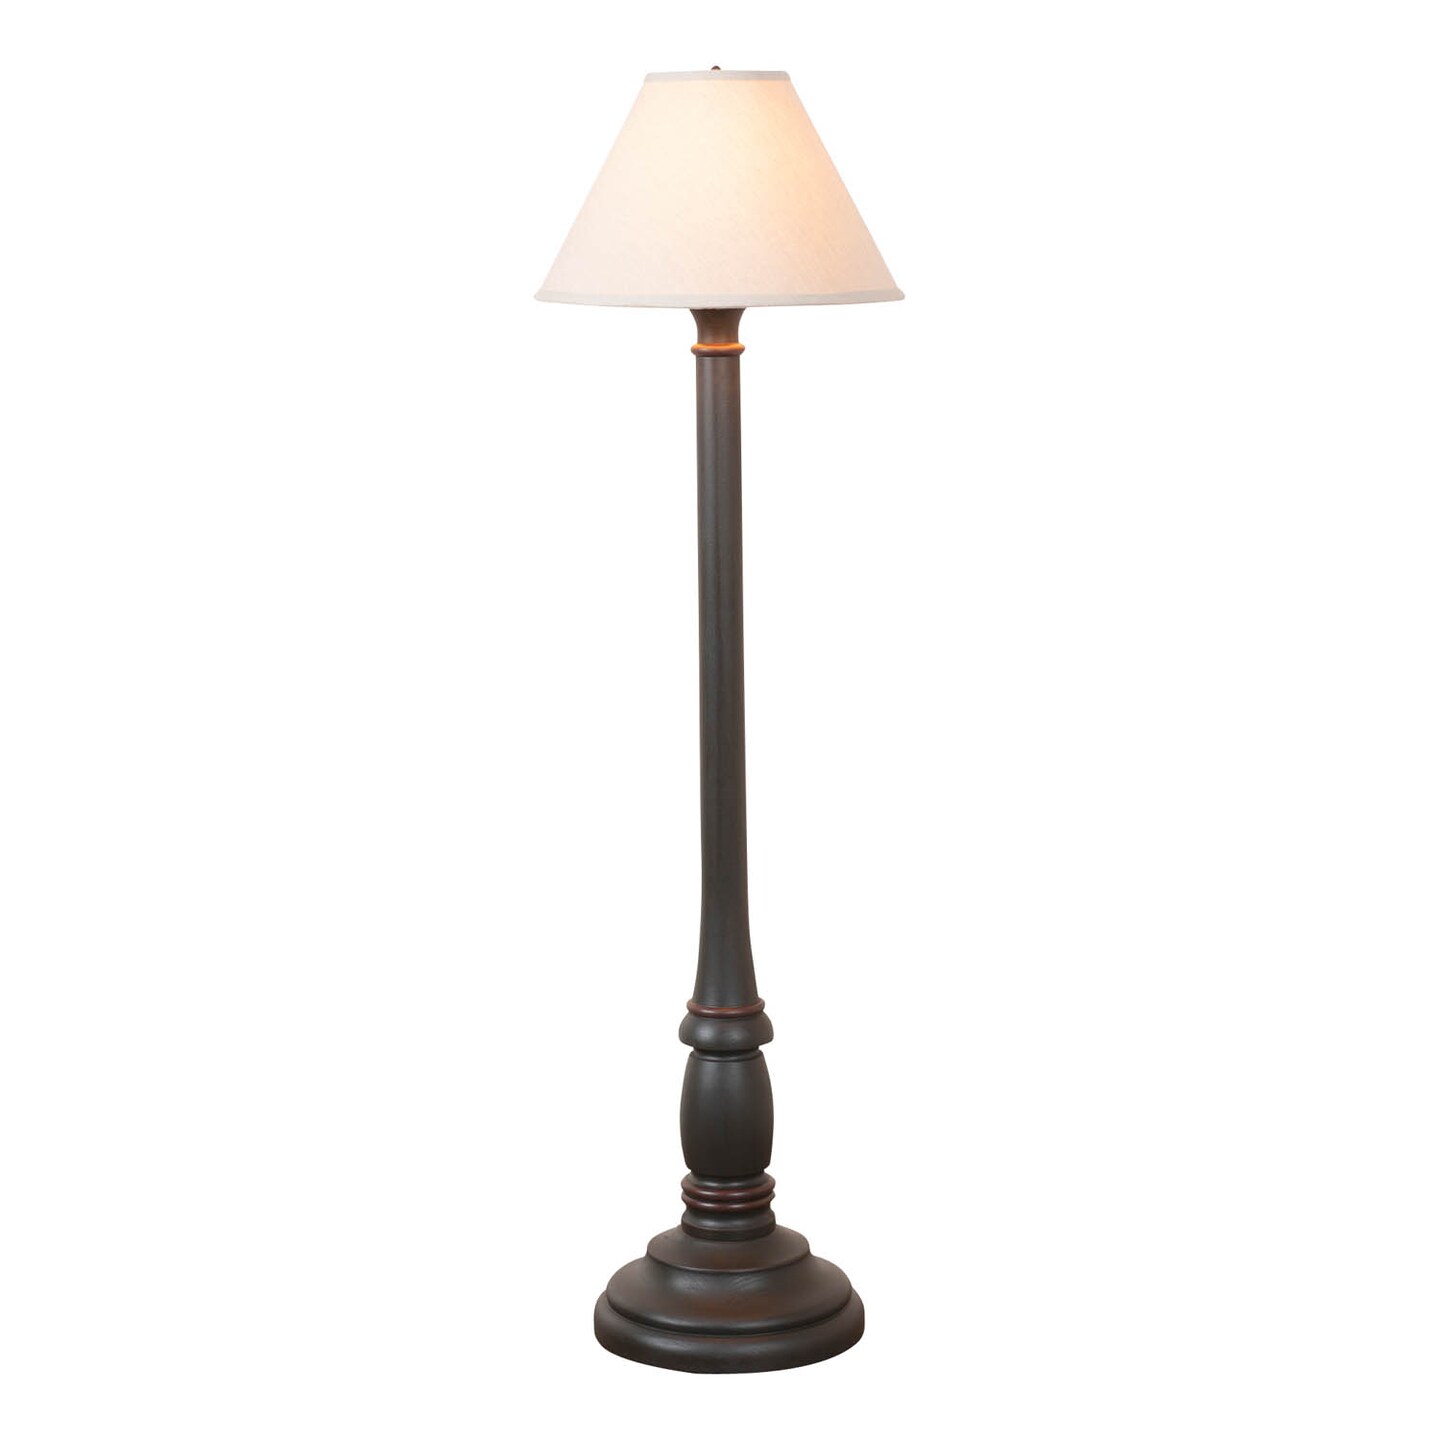 Irvins Country Tinware Brinton House Floor Lamp in Rustic Black with Linen Fabric Shade